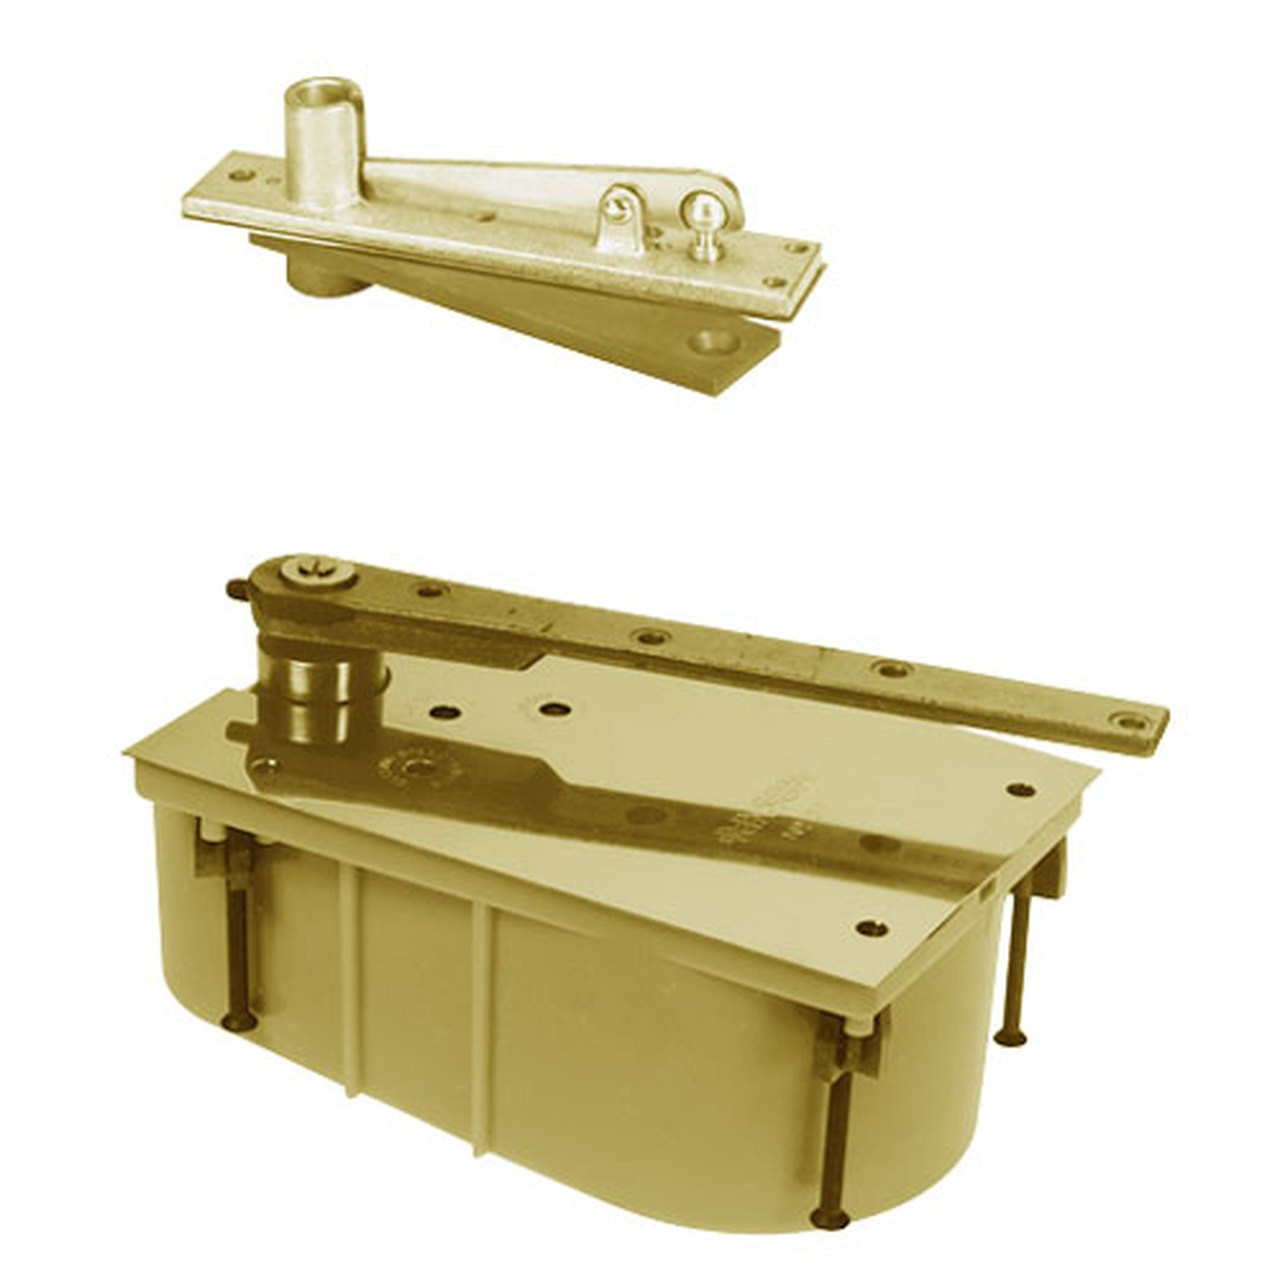 28-105S-554-LFP-LCC-RH-606 Rixson 28 Series Heavy Duty Single Acting Center Hung Floor Closer with Concealed Arm in Satin Brass Finish